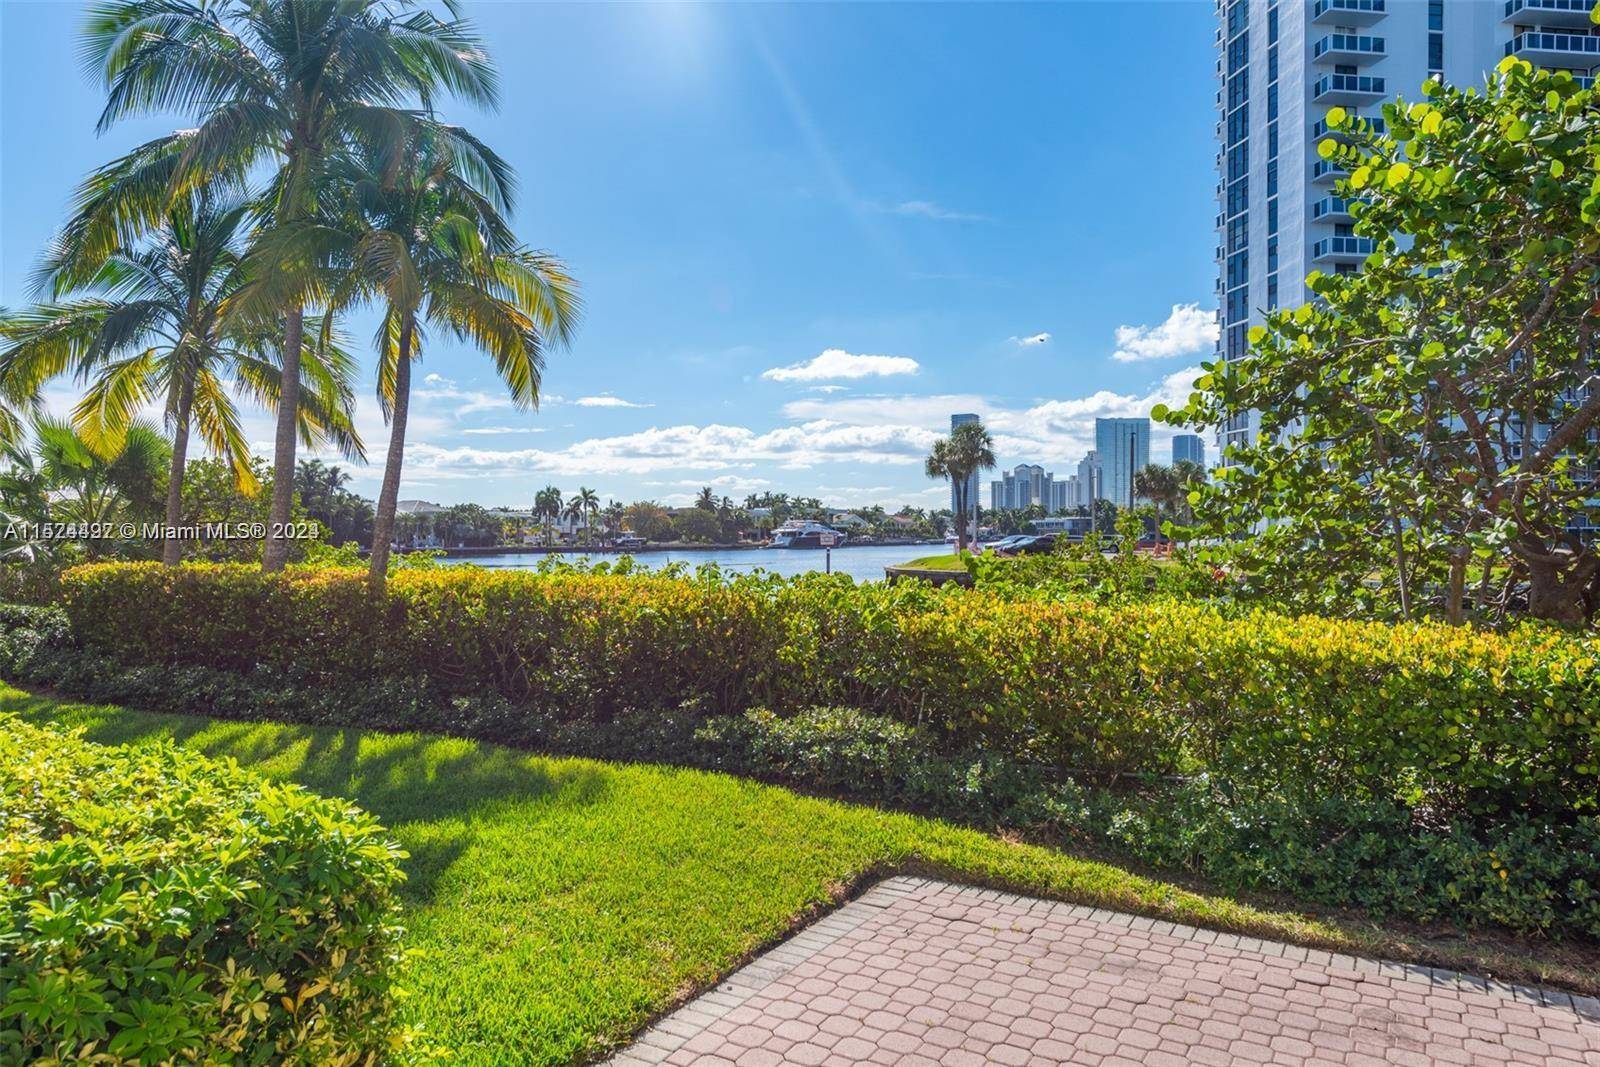 Introducing a luxurious 4 bedroom, 3 full bathroom townhome with 2, 900 square feet of living space, now available for rent in the prestigious One Island Place community in Aventura.